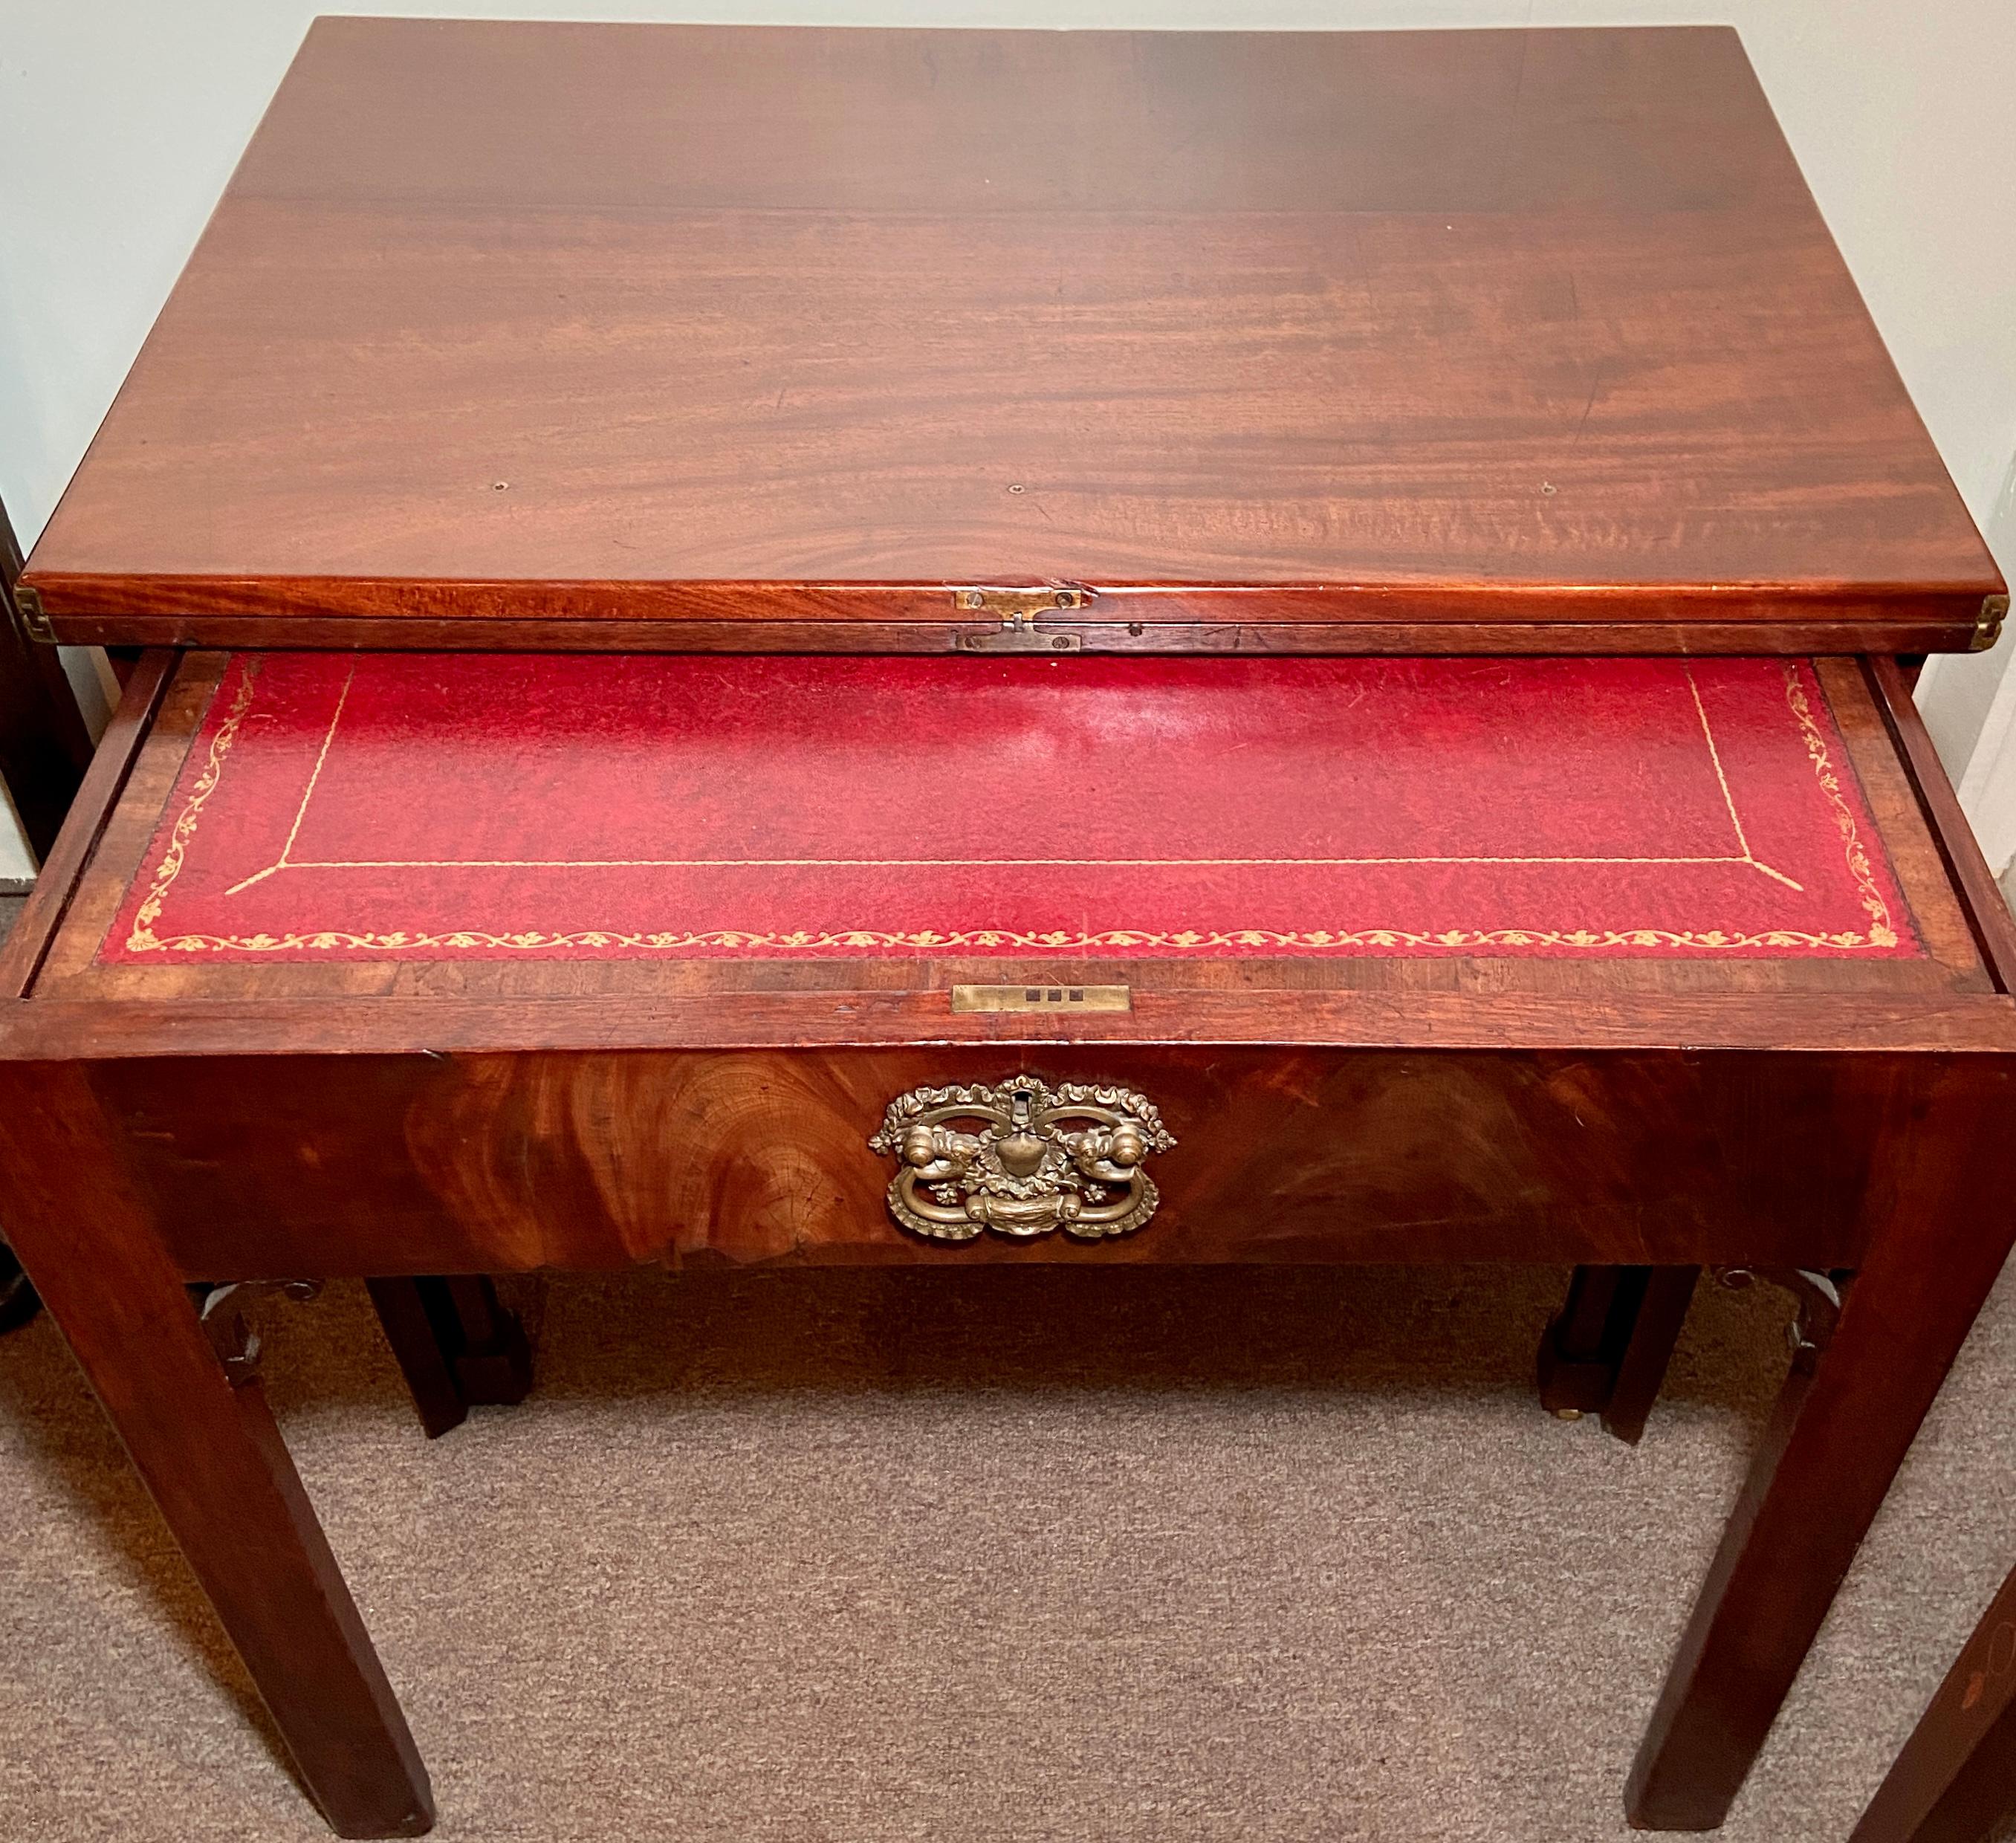 Antique Early 19th Century English Georgian Architect's Desk For Sale 2